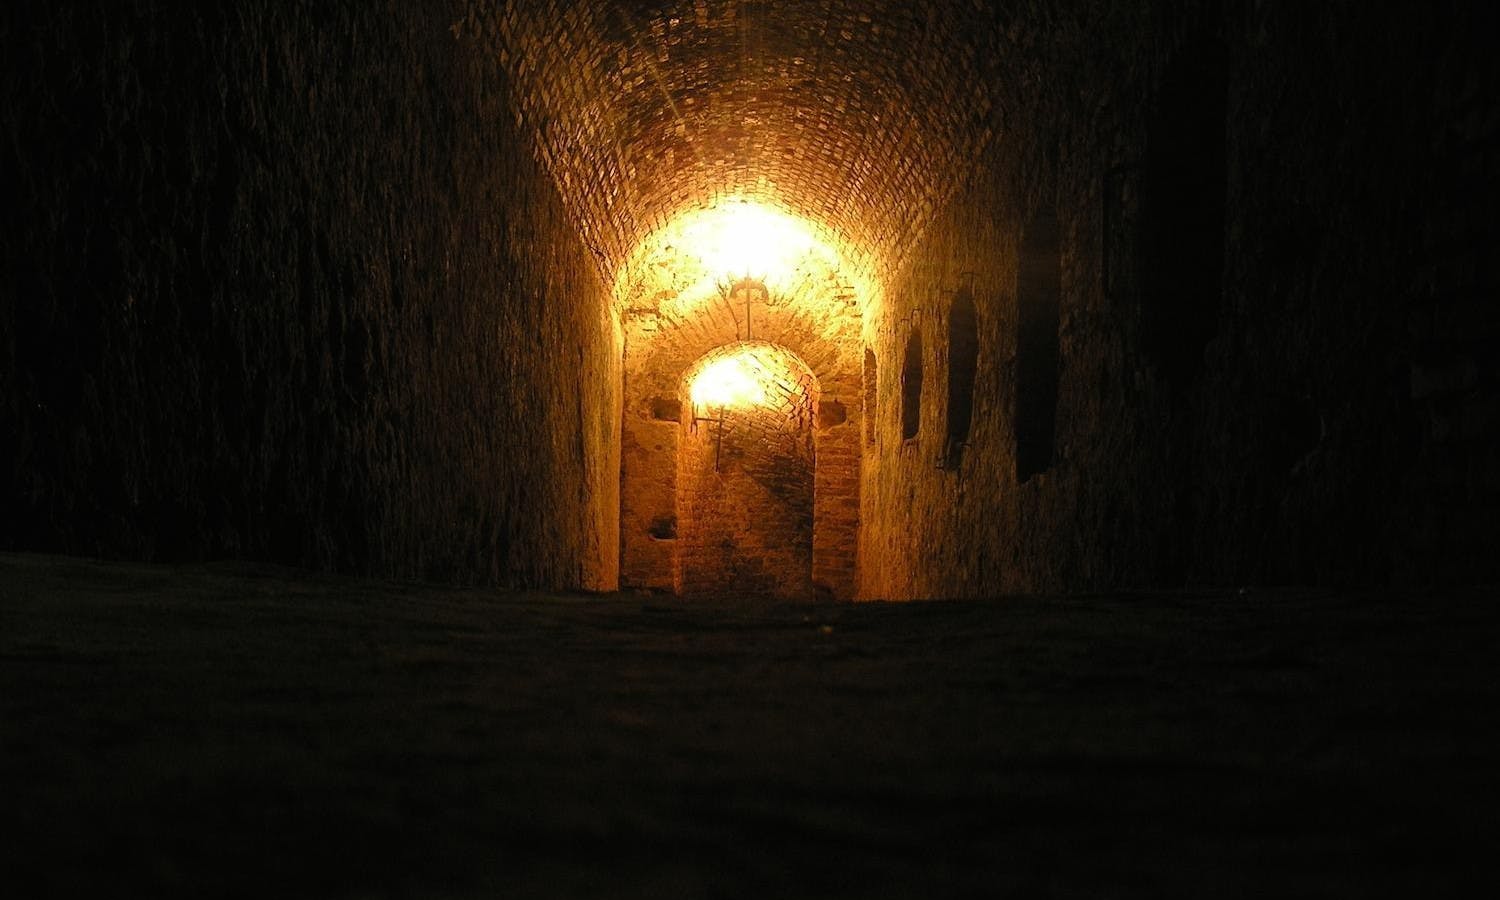 Roman Basilicas and Secret Underground Catacombs on the Appian way